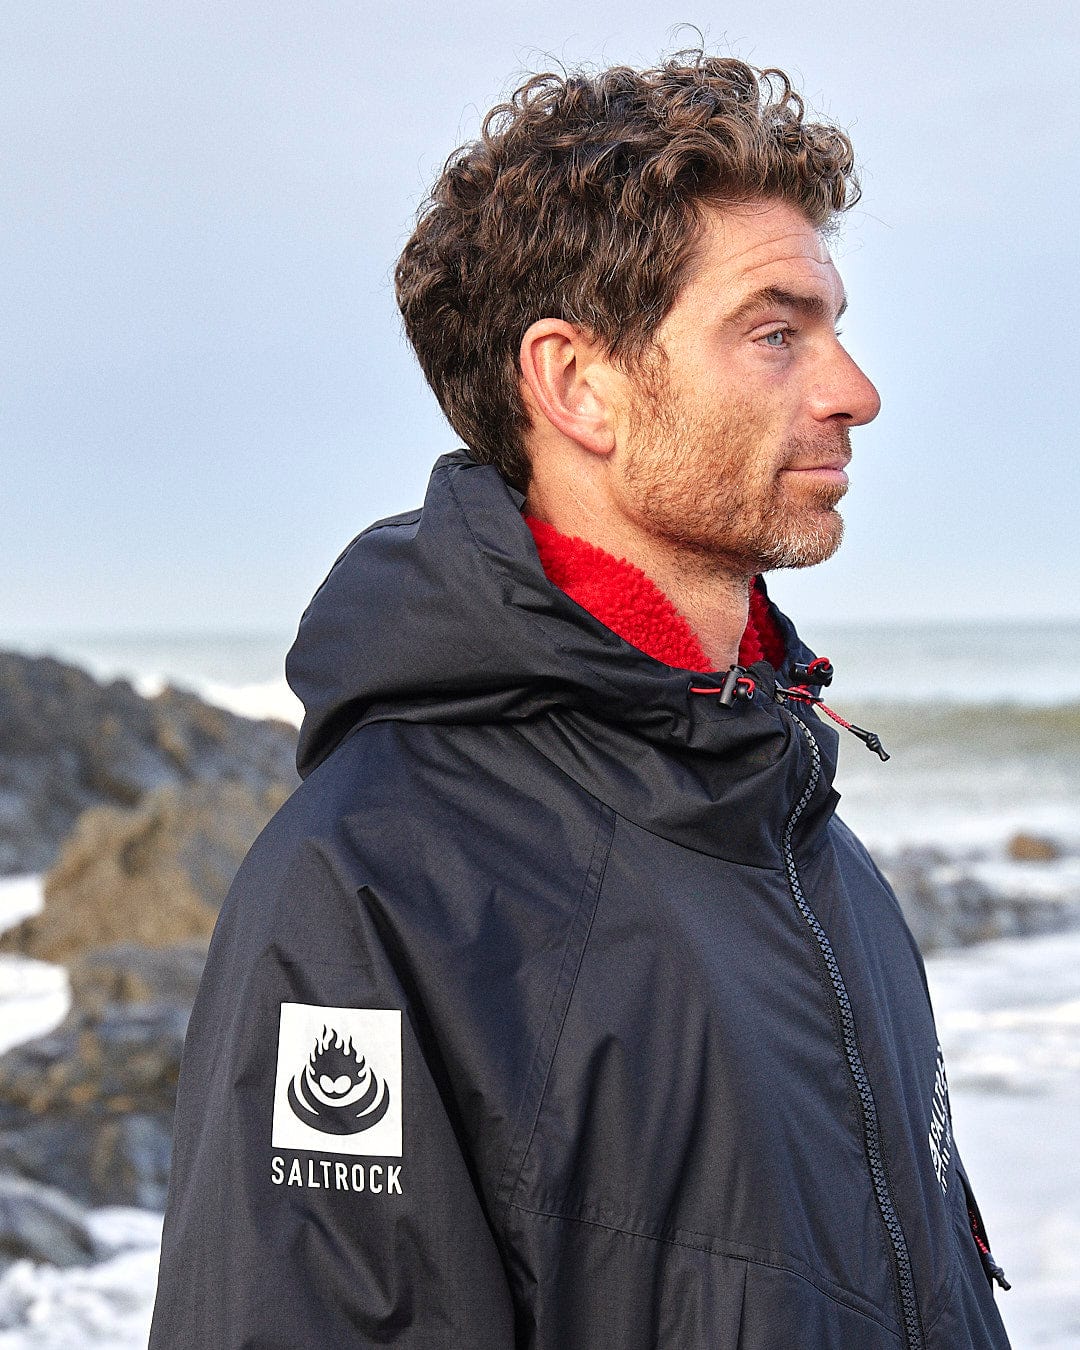 A man with curly hair wearing a Saltrock Recycled Four Seasons Changing Robe in Black/Red gazes into the distance by a rocky beach.